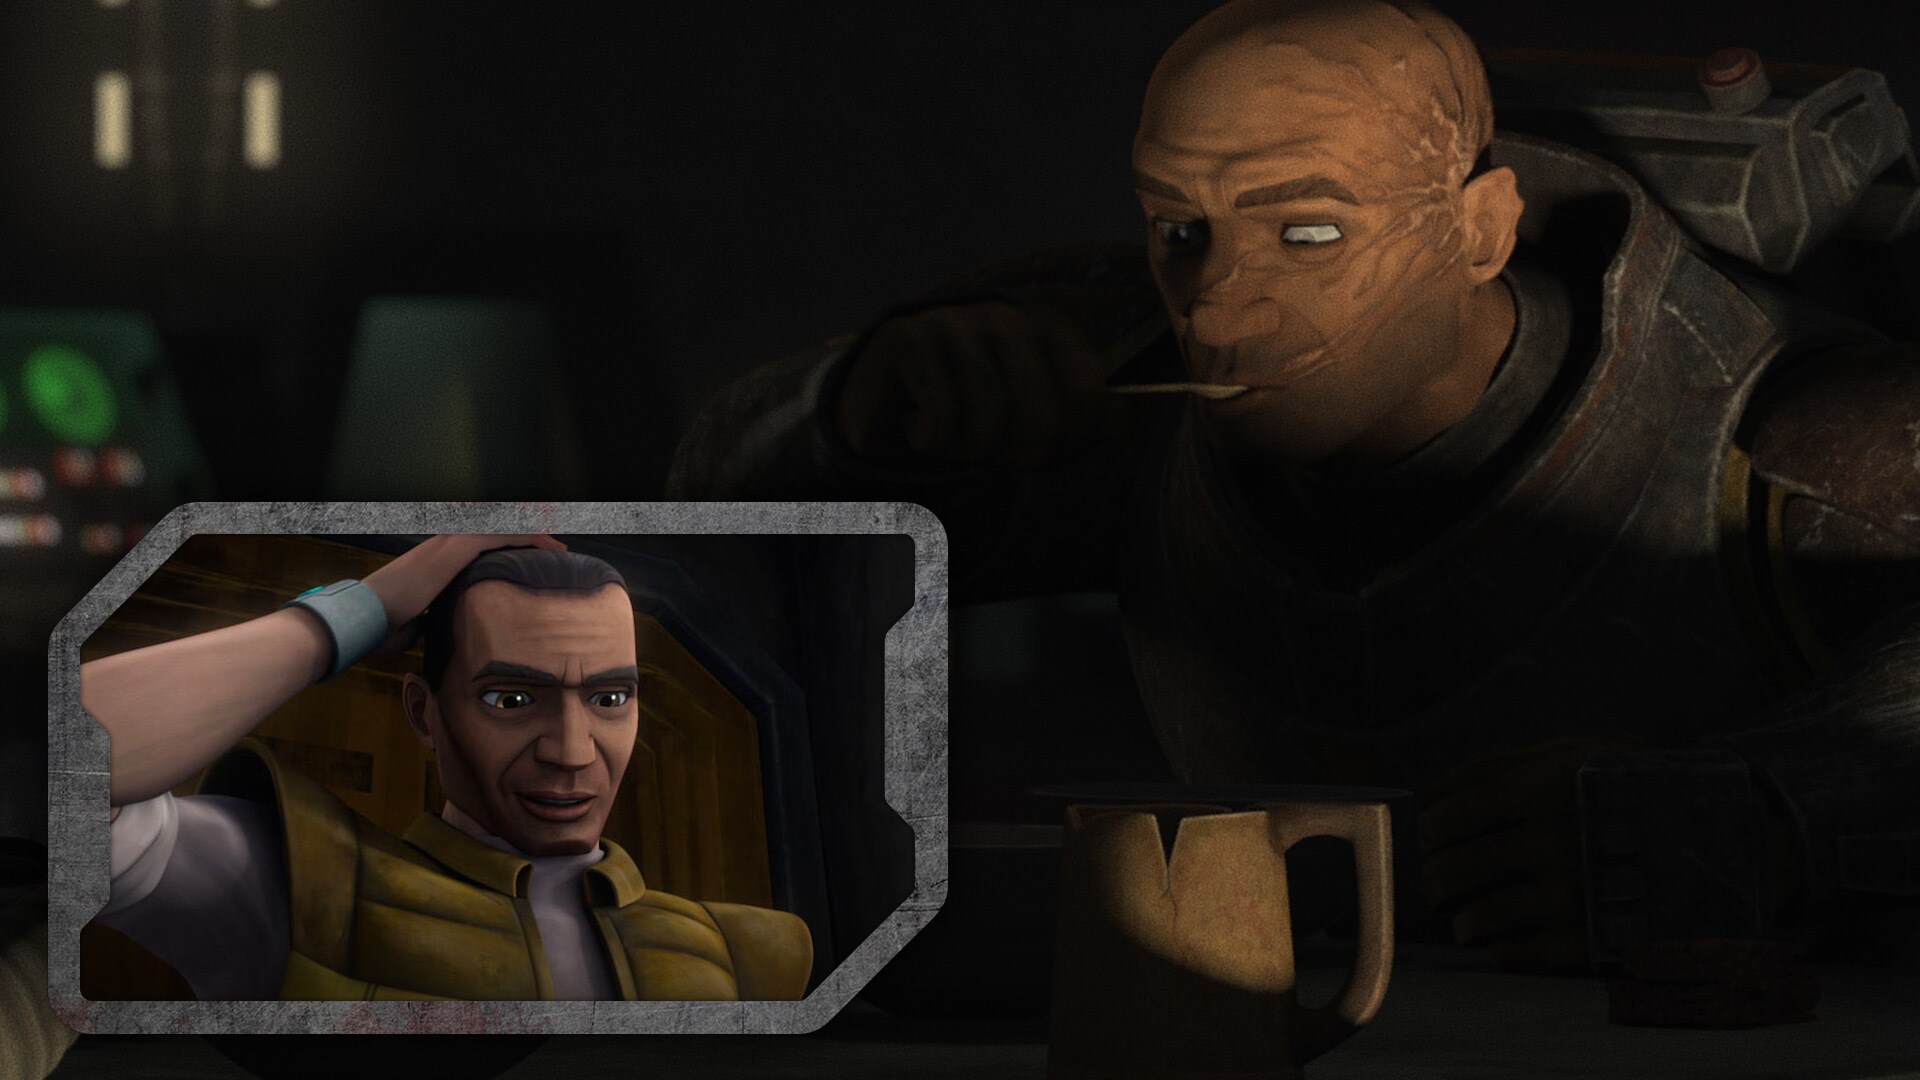 While former clone commando Gregor is not at the Monastery base, his presence is still felt when ...